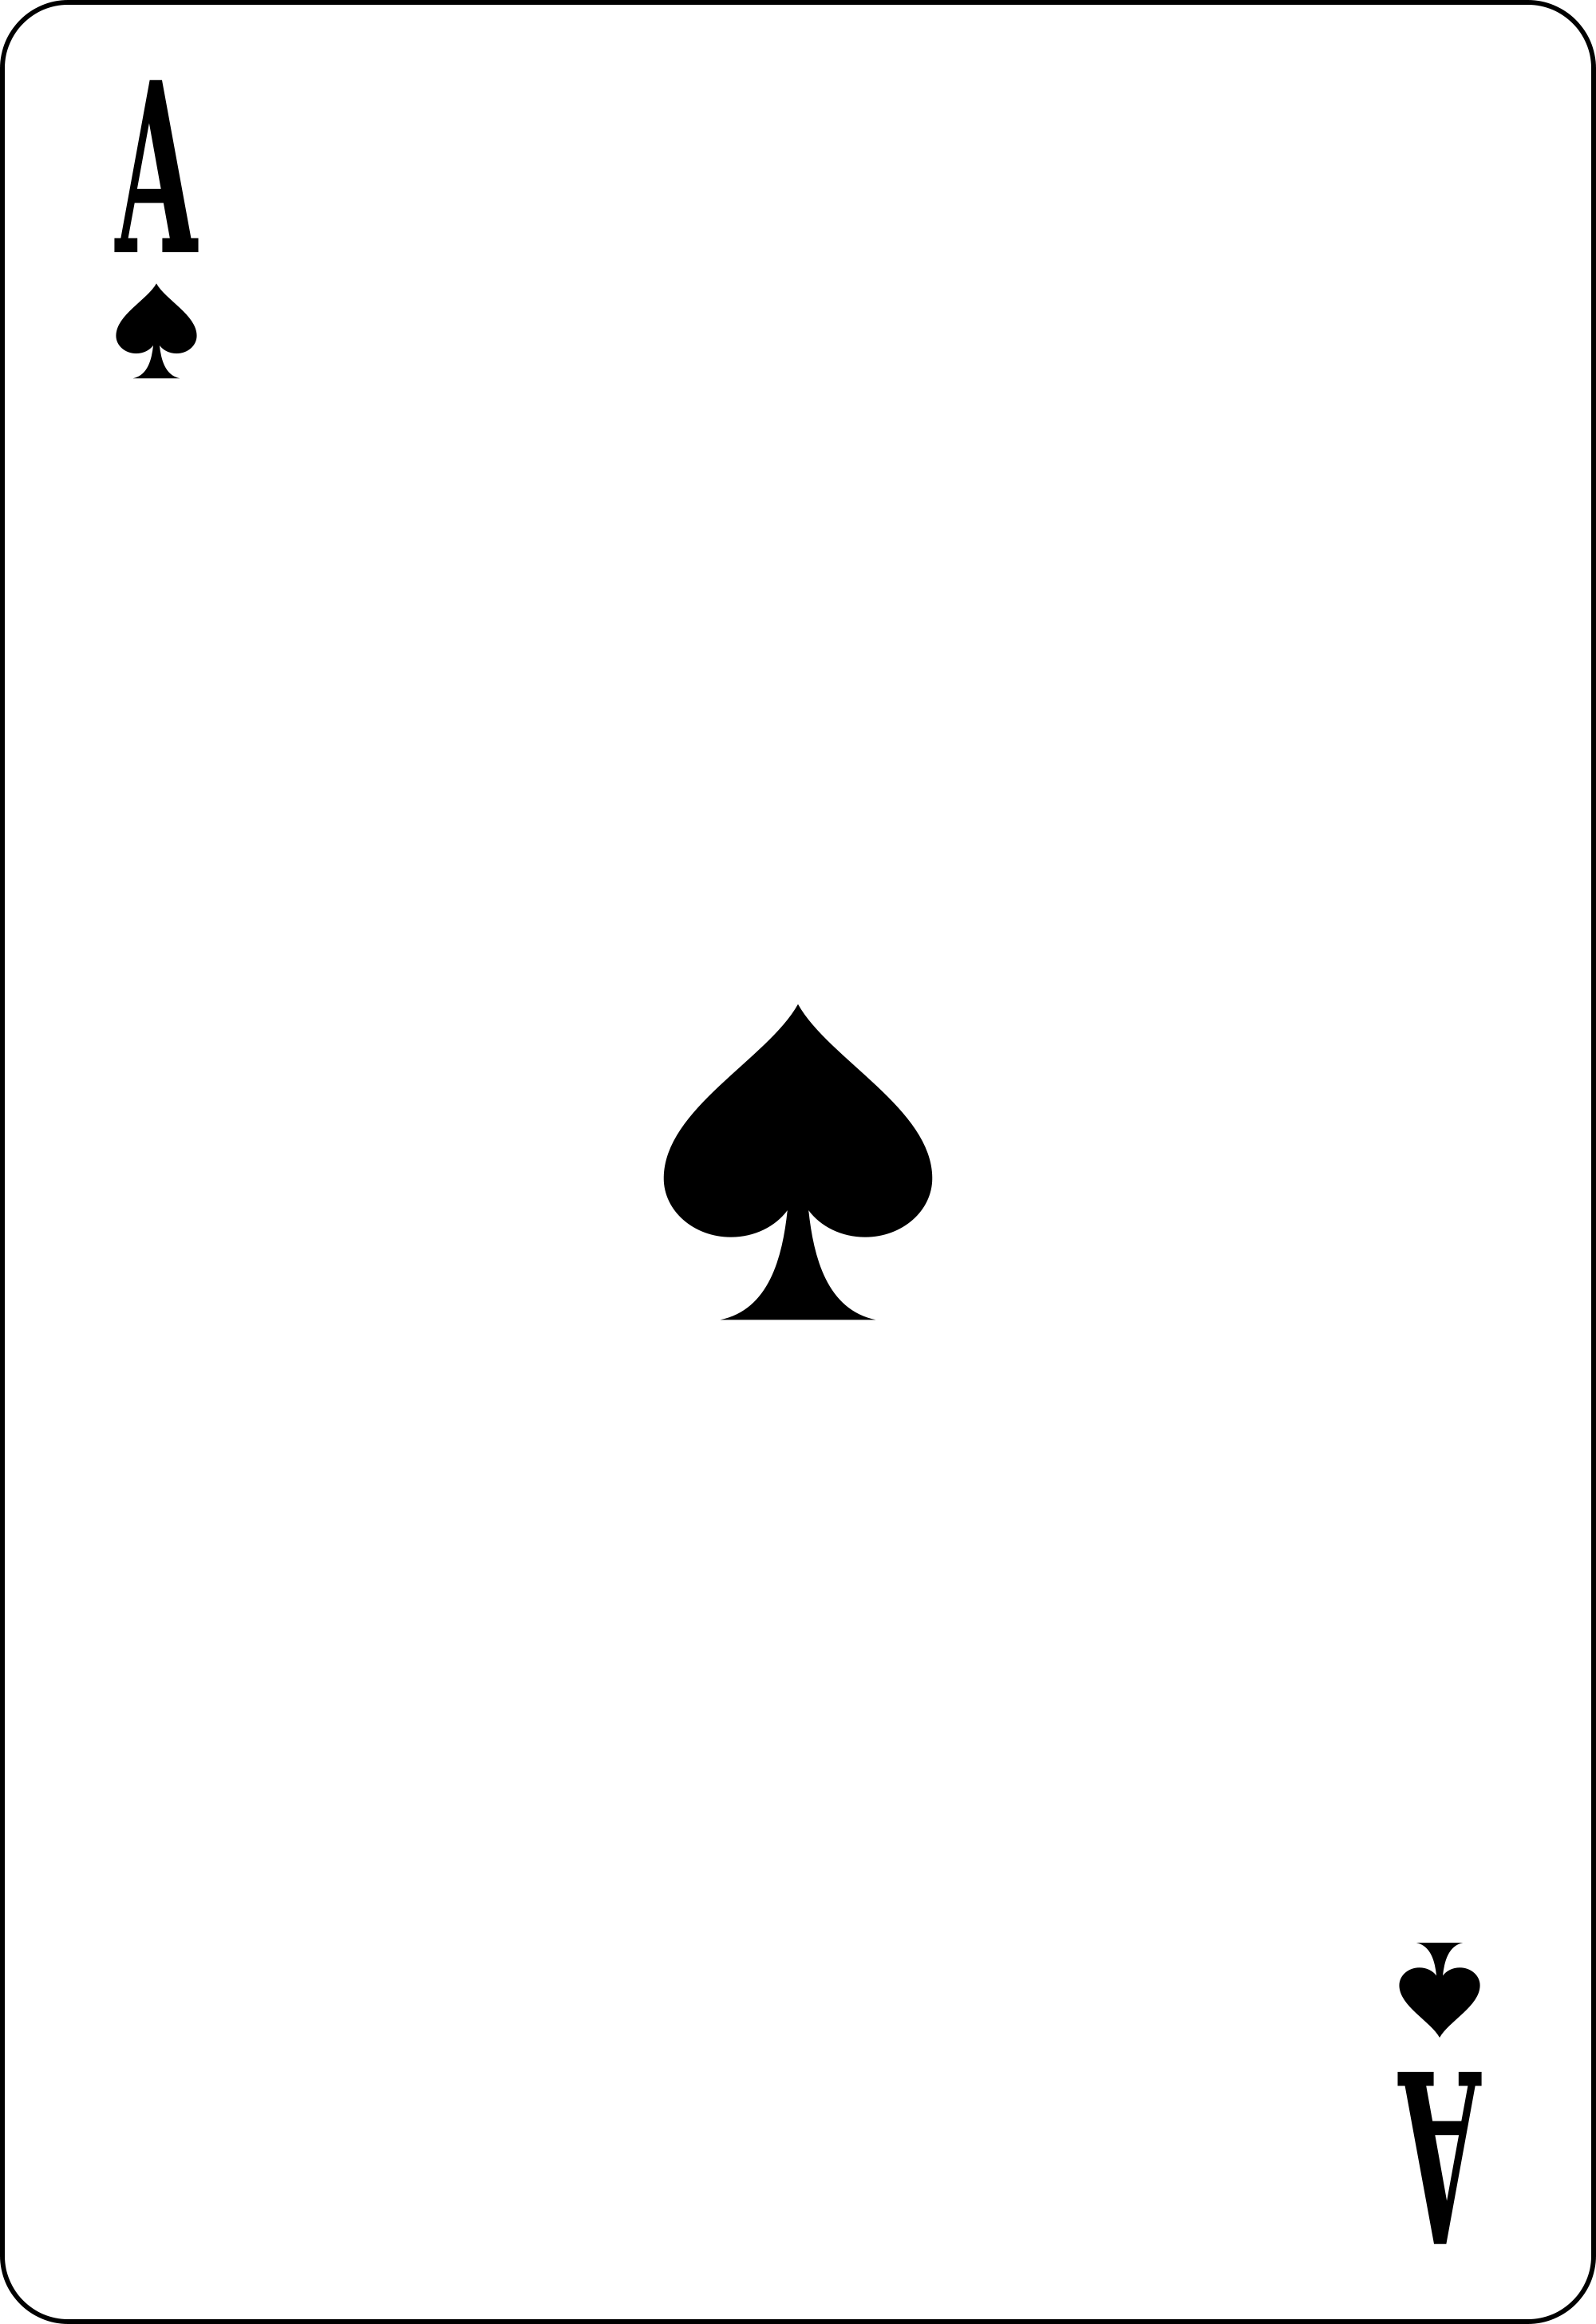 File:01 of spades A.svg - Wikimedia Commons